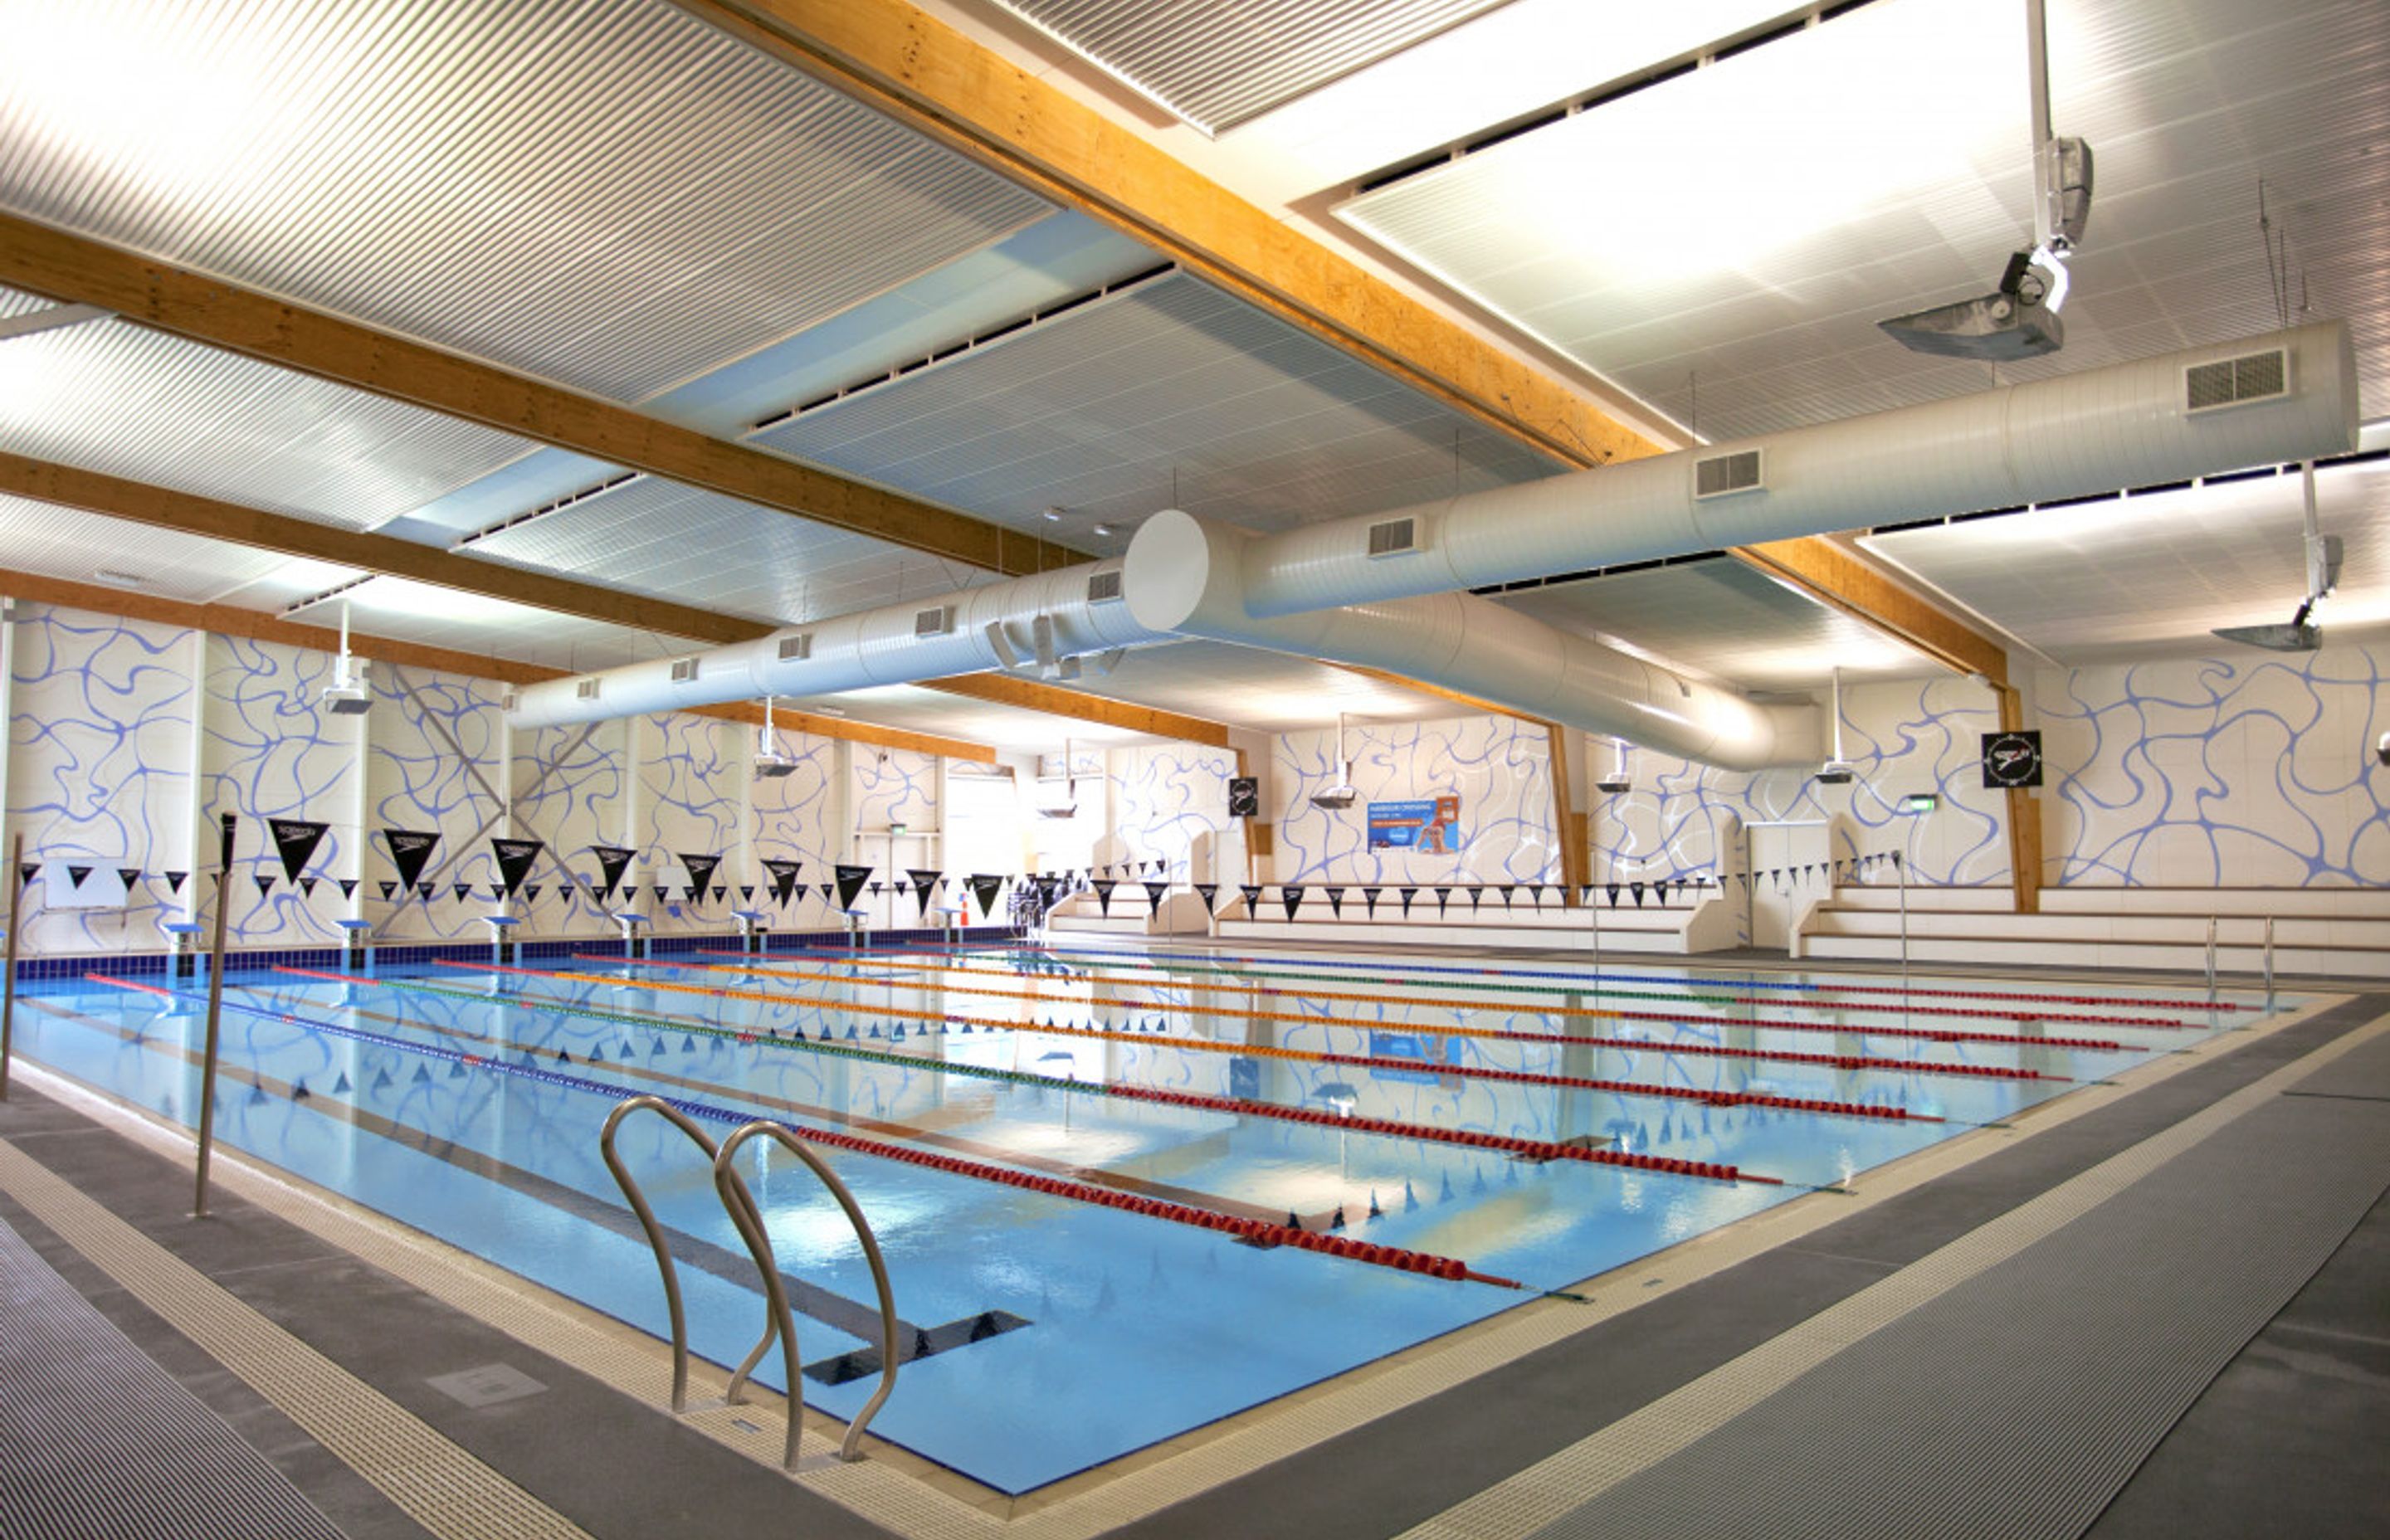 Treading Water: Silverdale Northern Arena